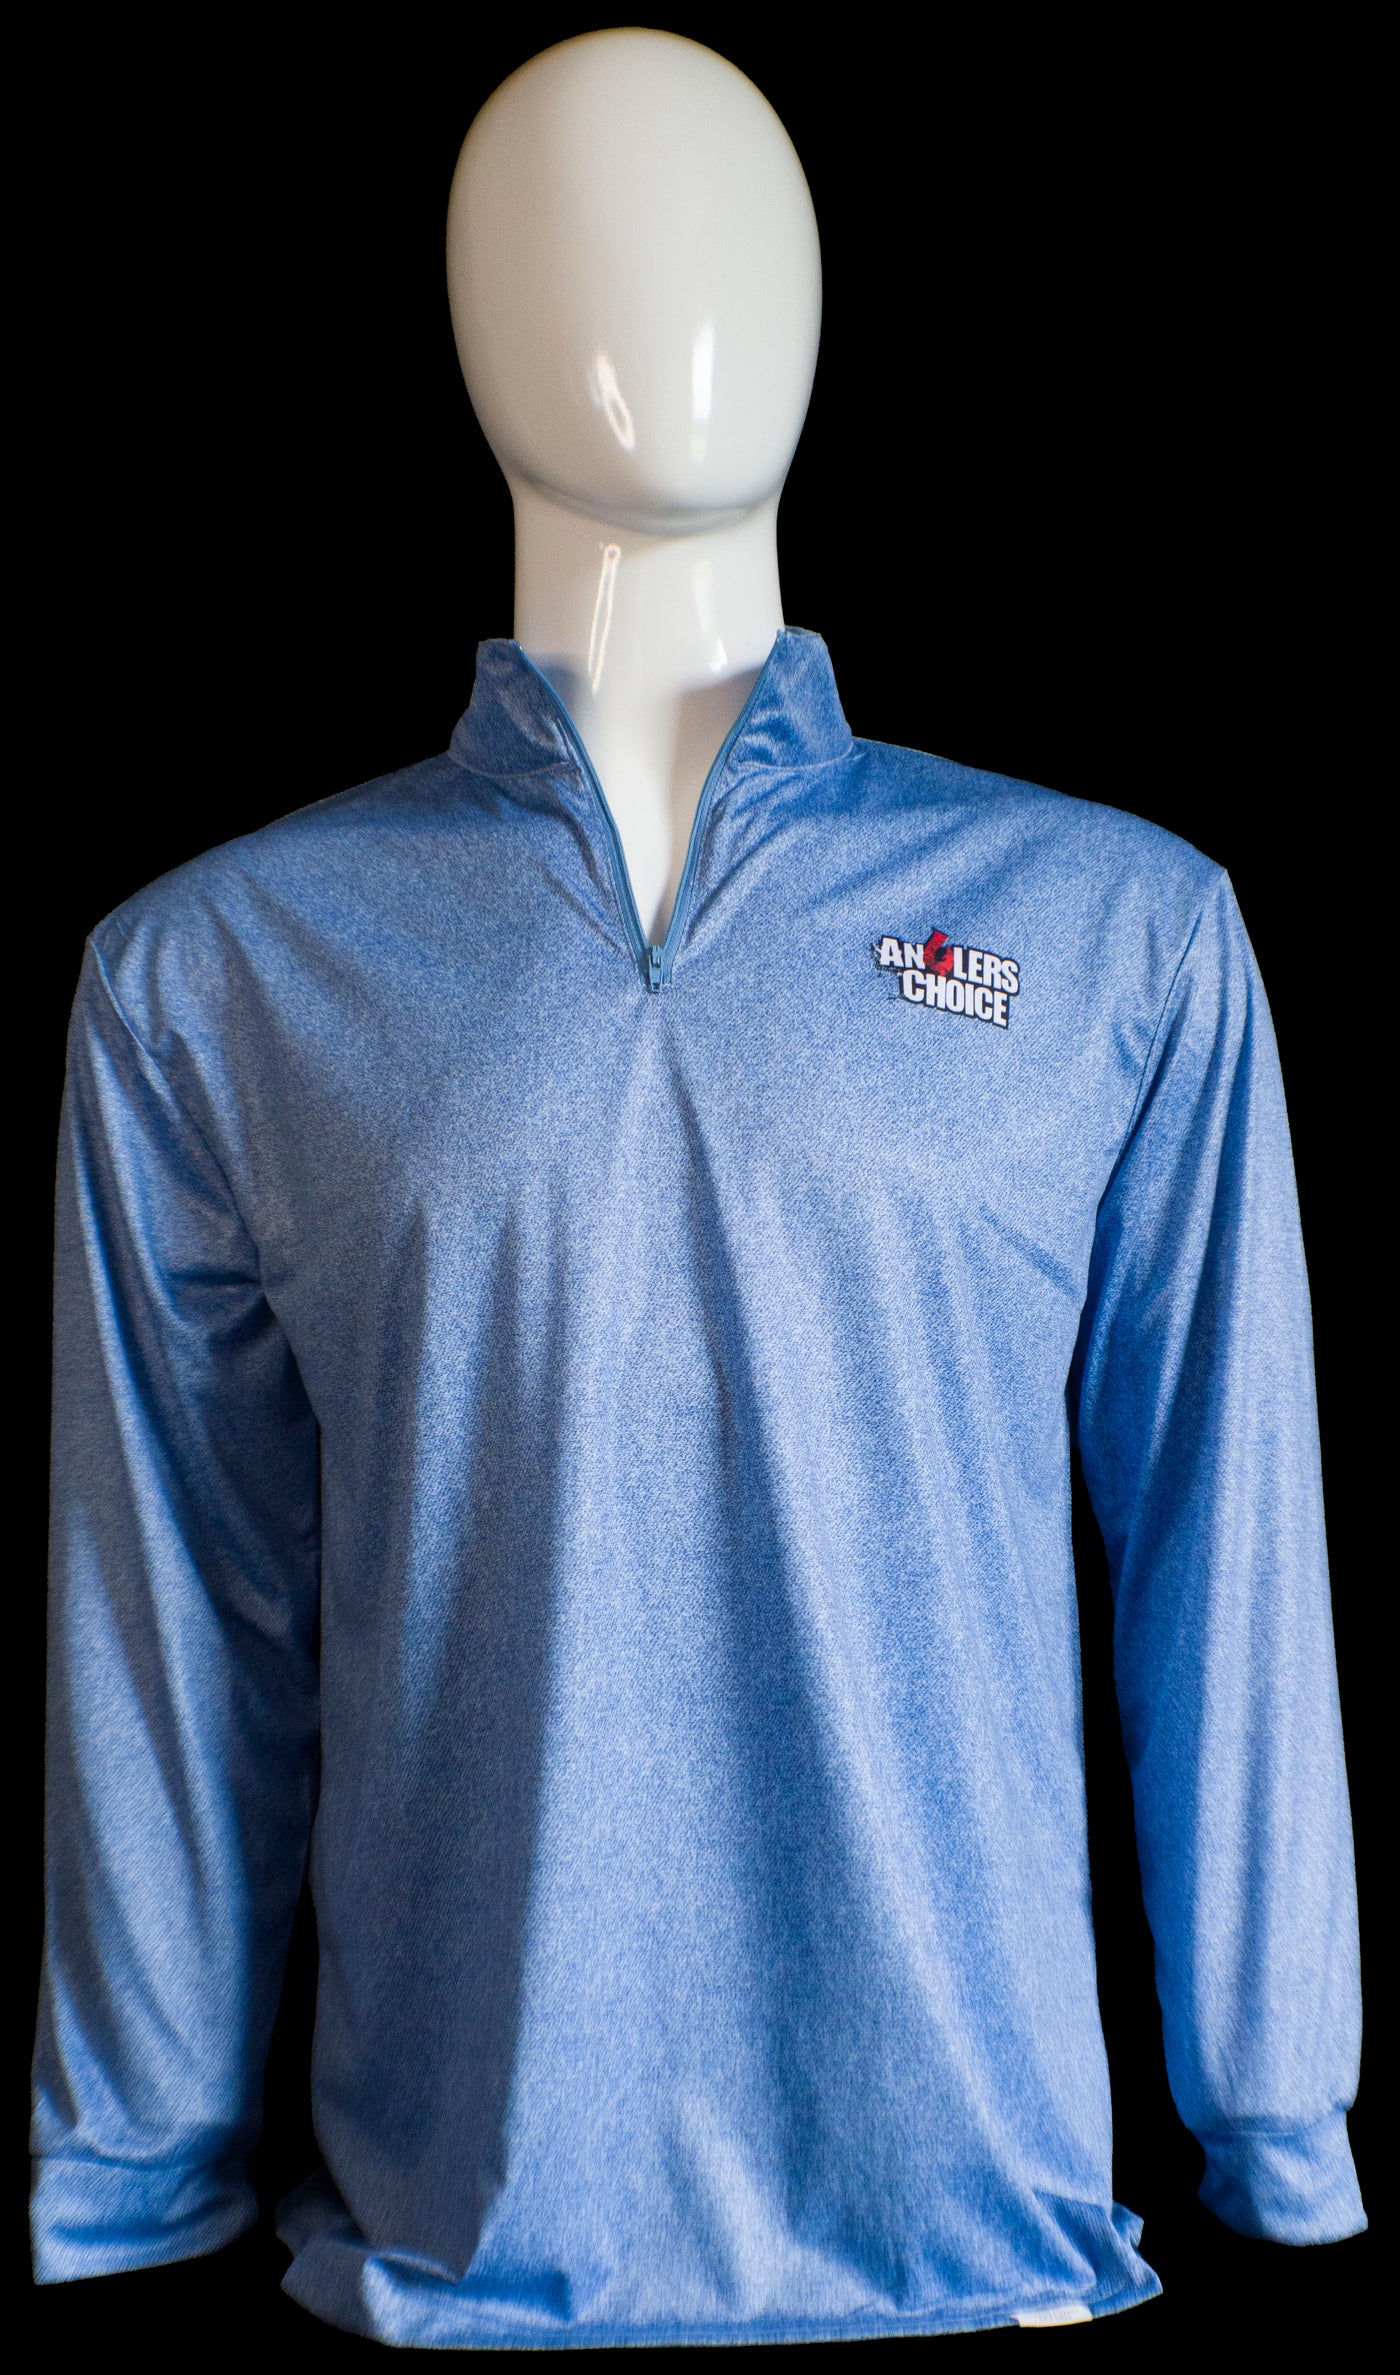 Anglers Choice Performance Collared Quarter Zip